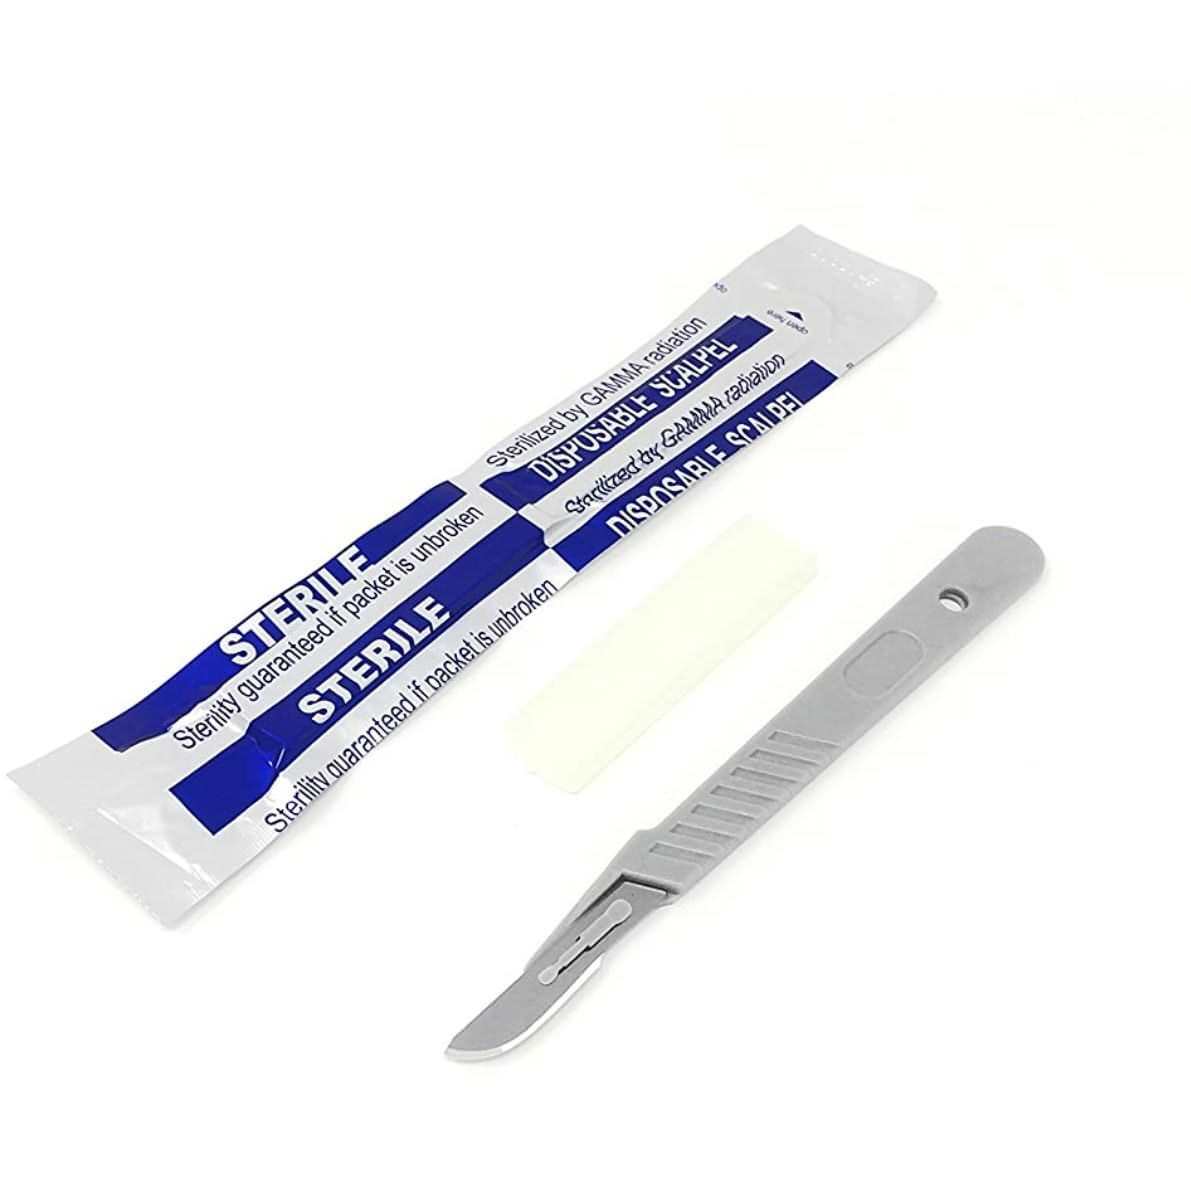 Disposable Sterile Scalpels No. 10 with Plastic Handle Sterile  Box of 10